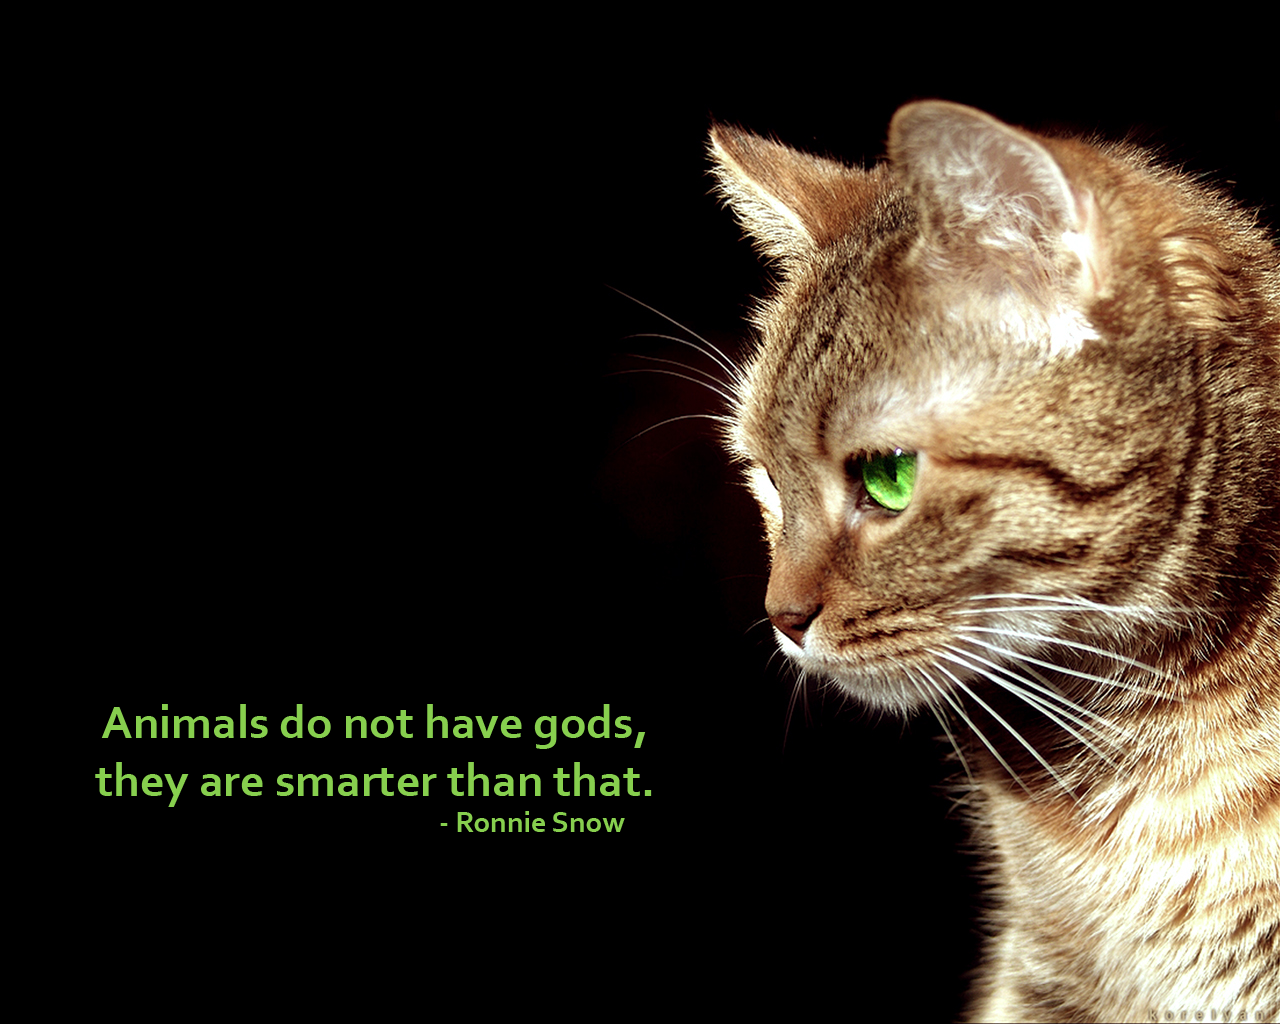 Animals And God Quotes. QuotesGram1280 x 1024